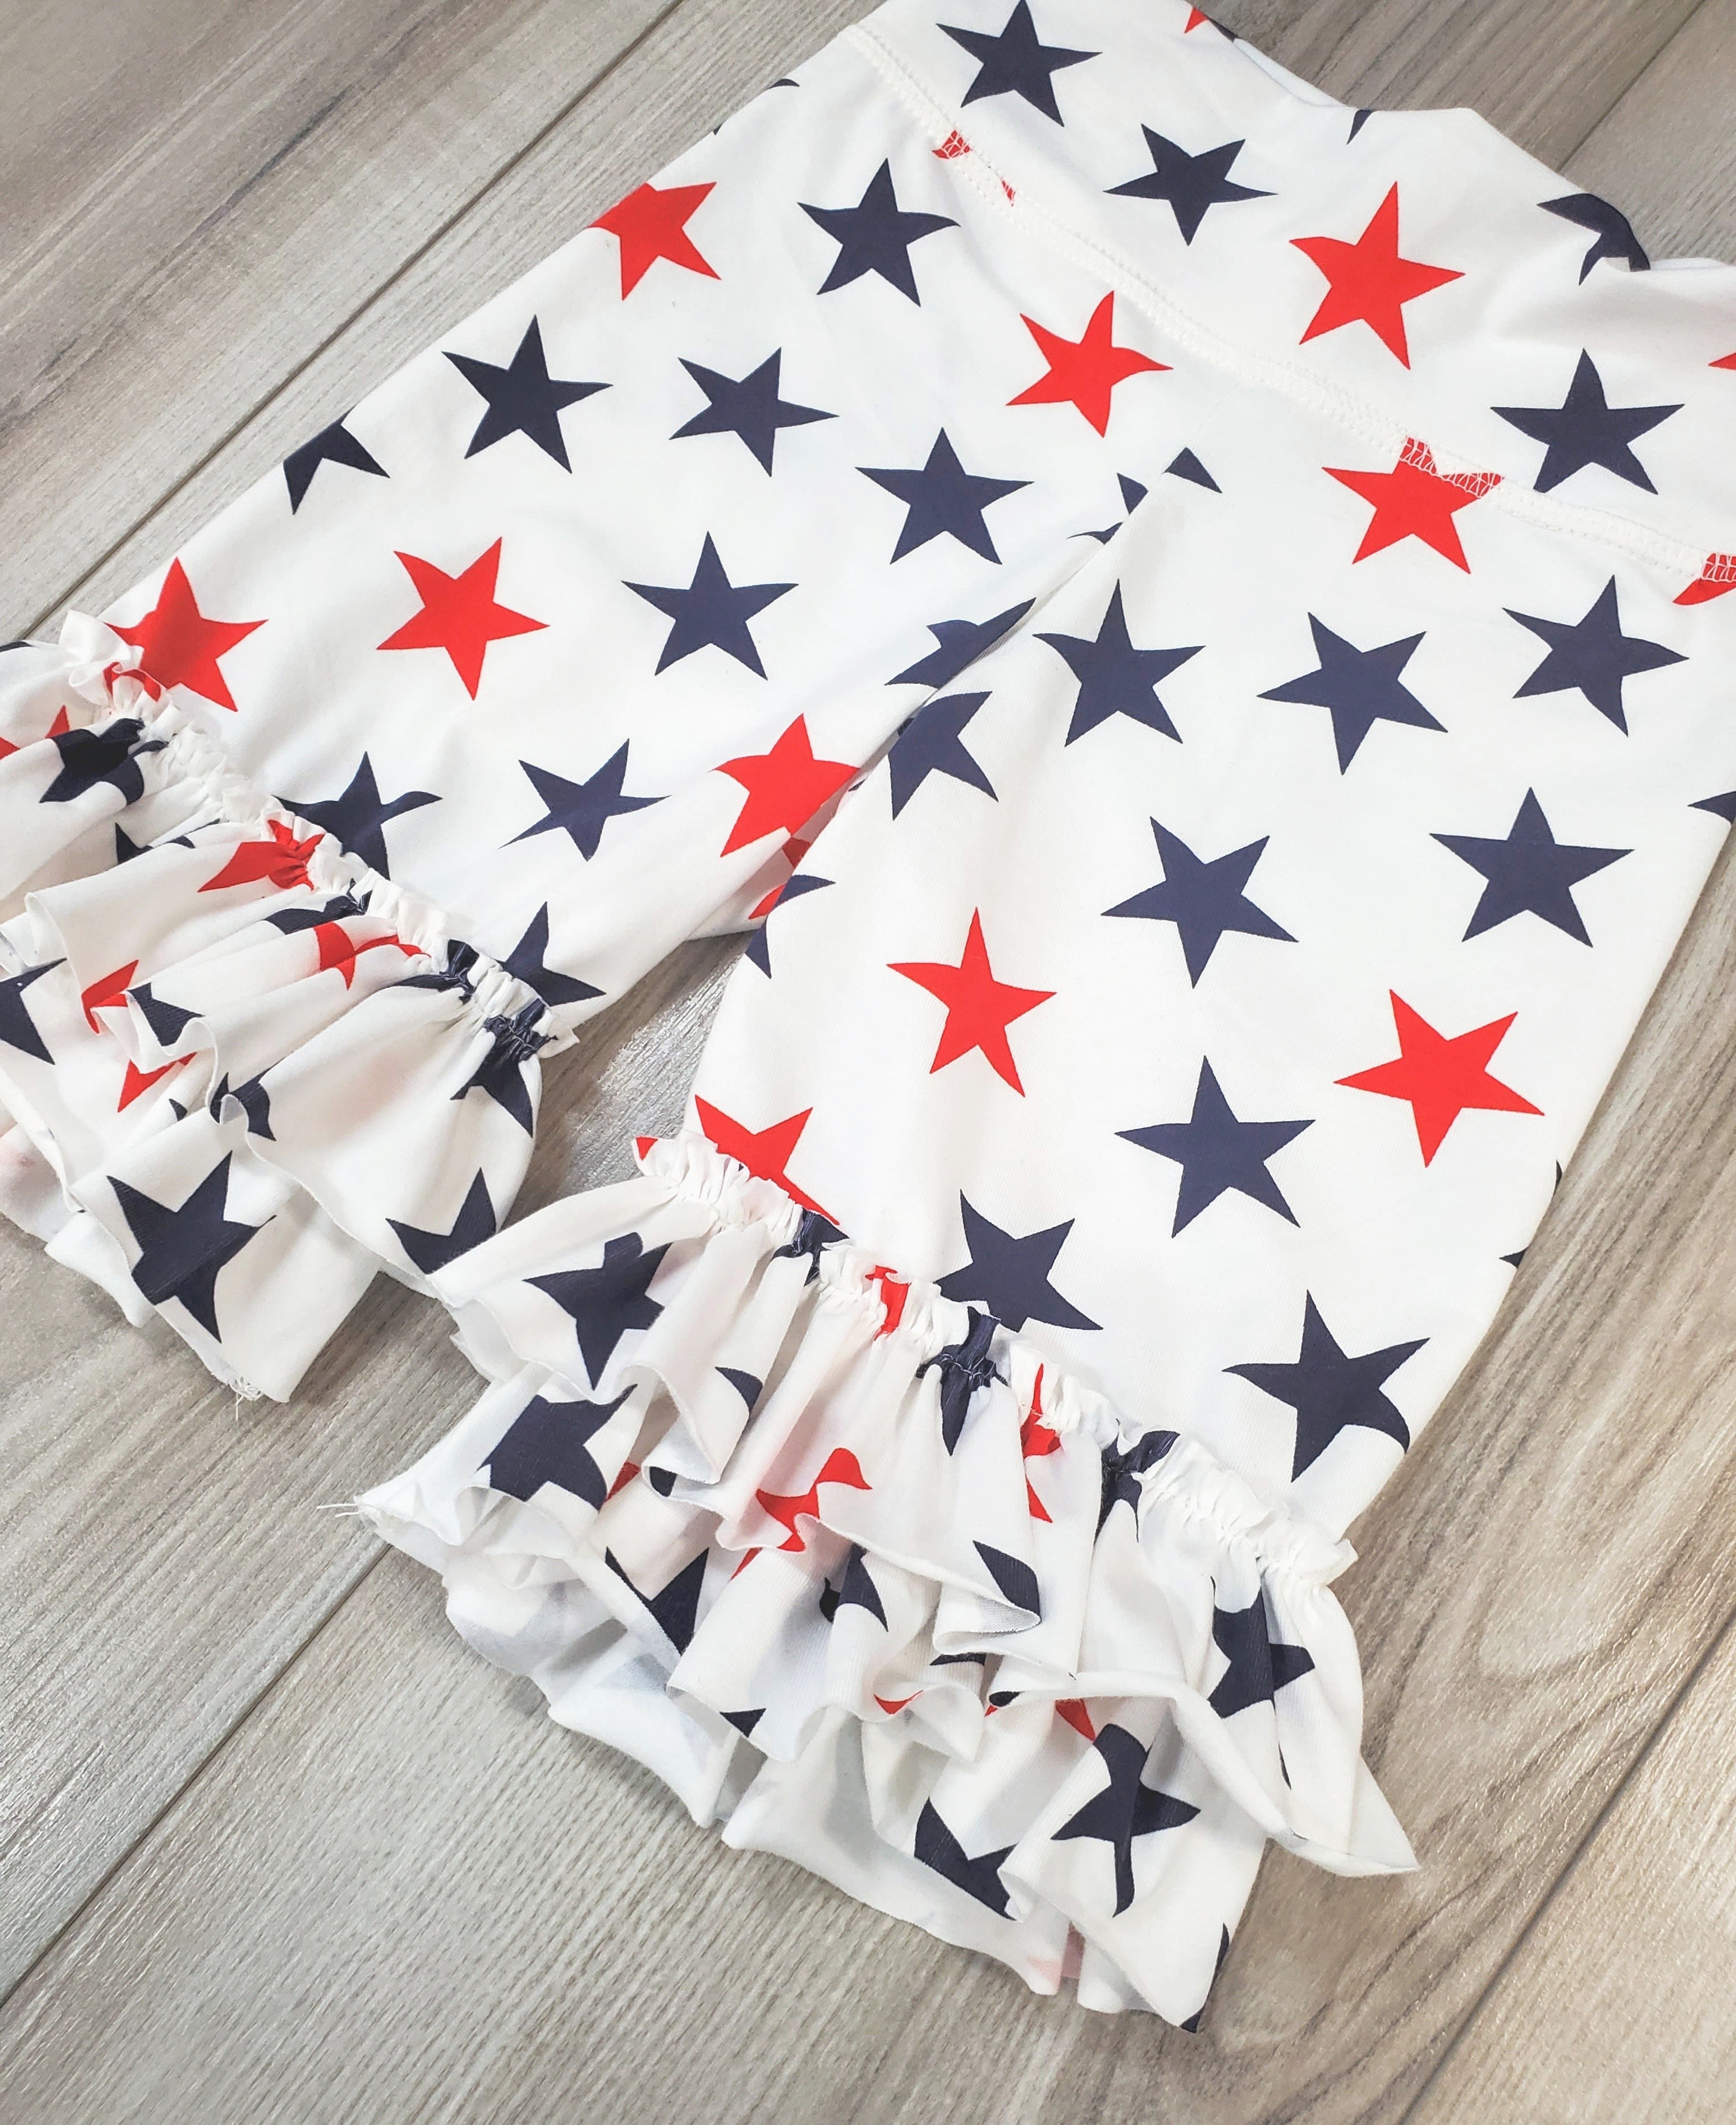 Let Freedom Ring Ruffle Shorties (ships in 2 weeks)